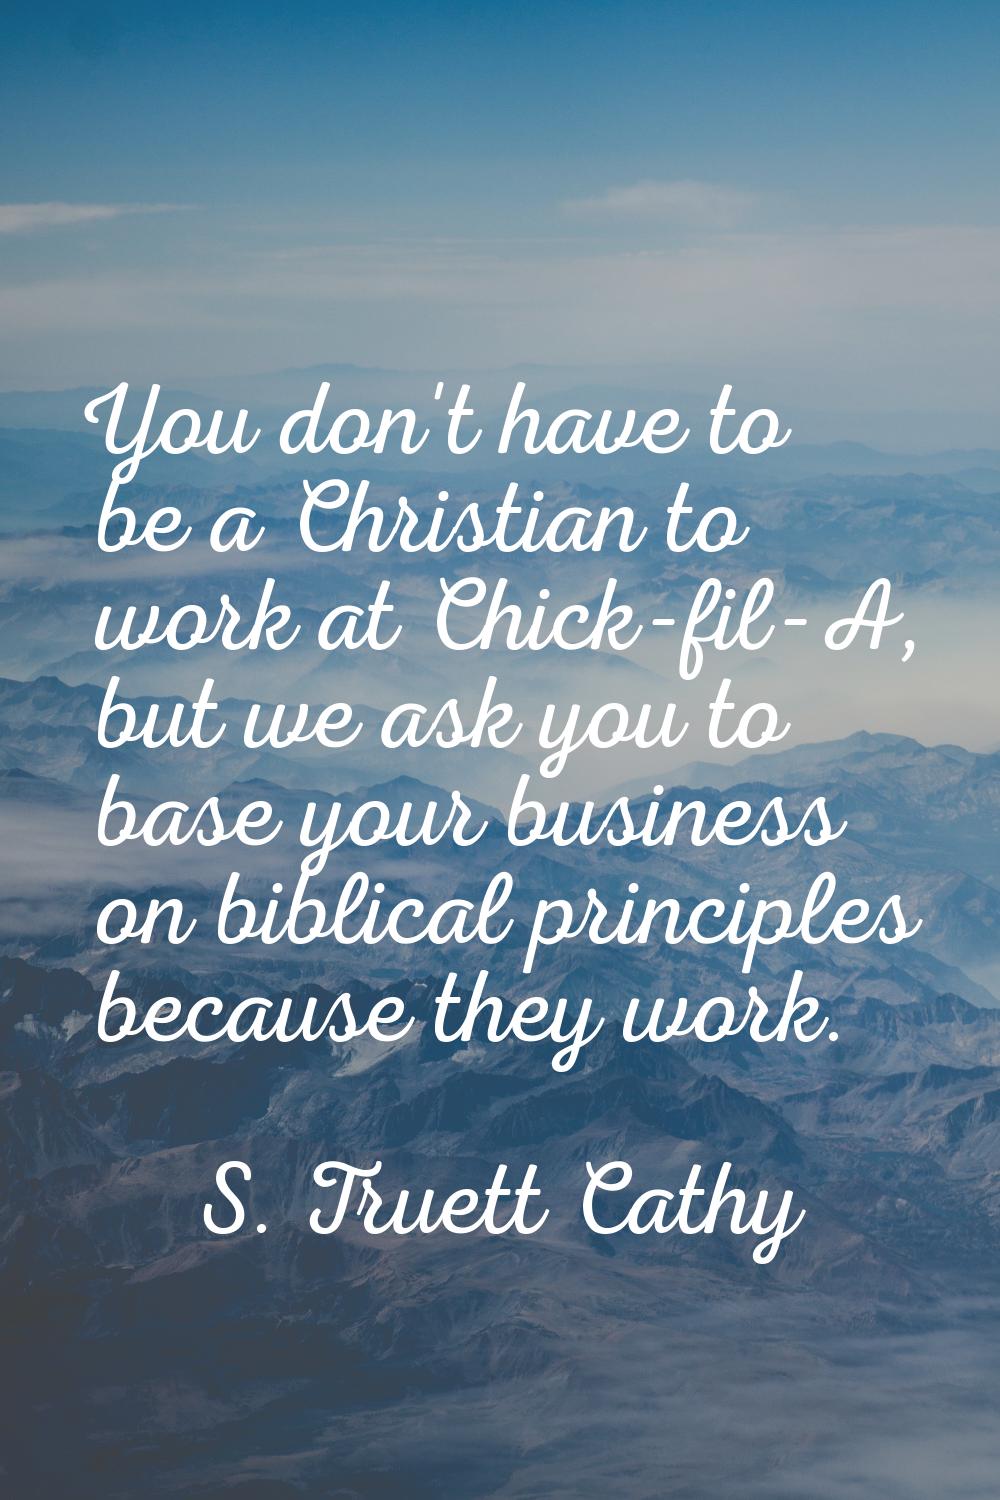 You don't have to be a Christian to work at Chick-fil-A, but we ask you to base your business on bi